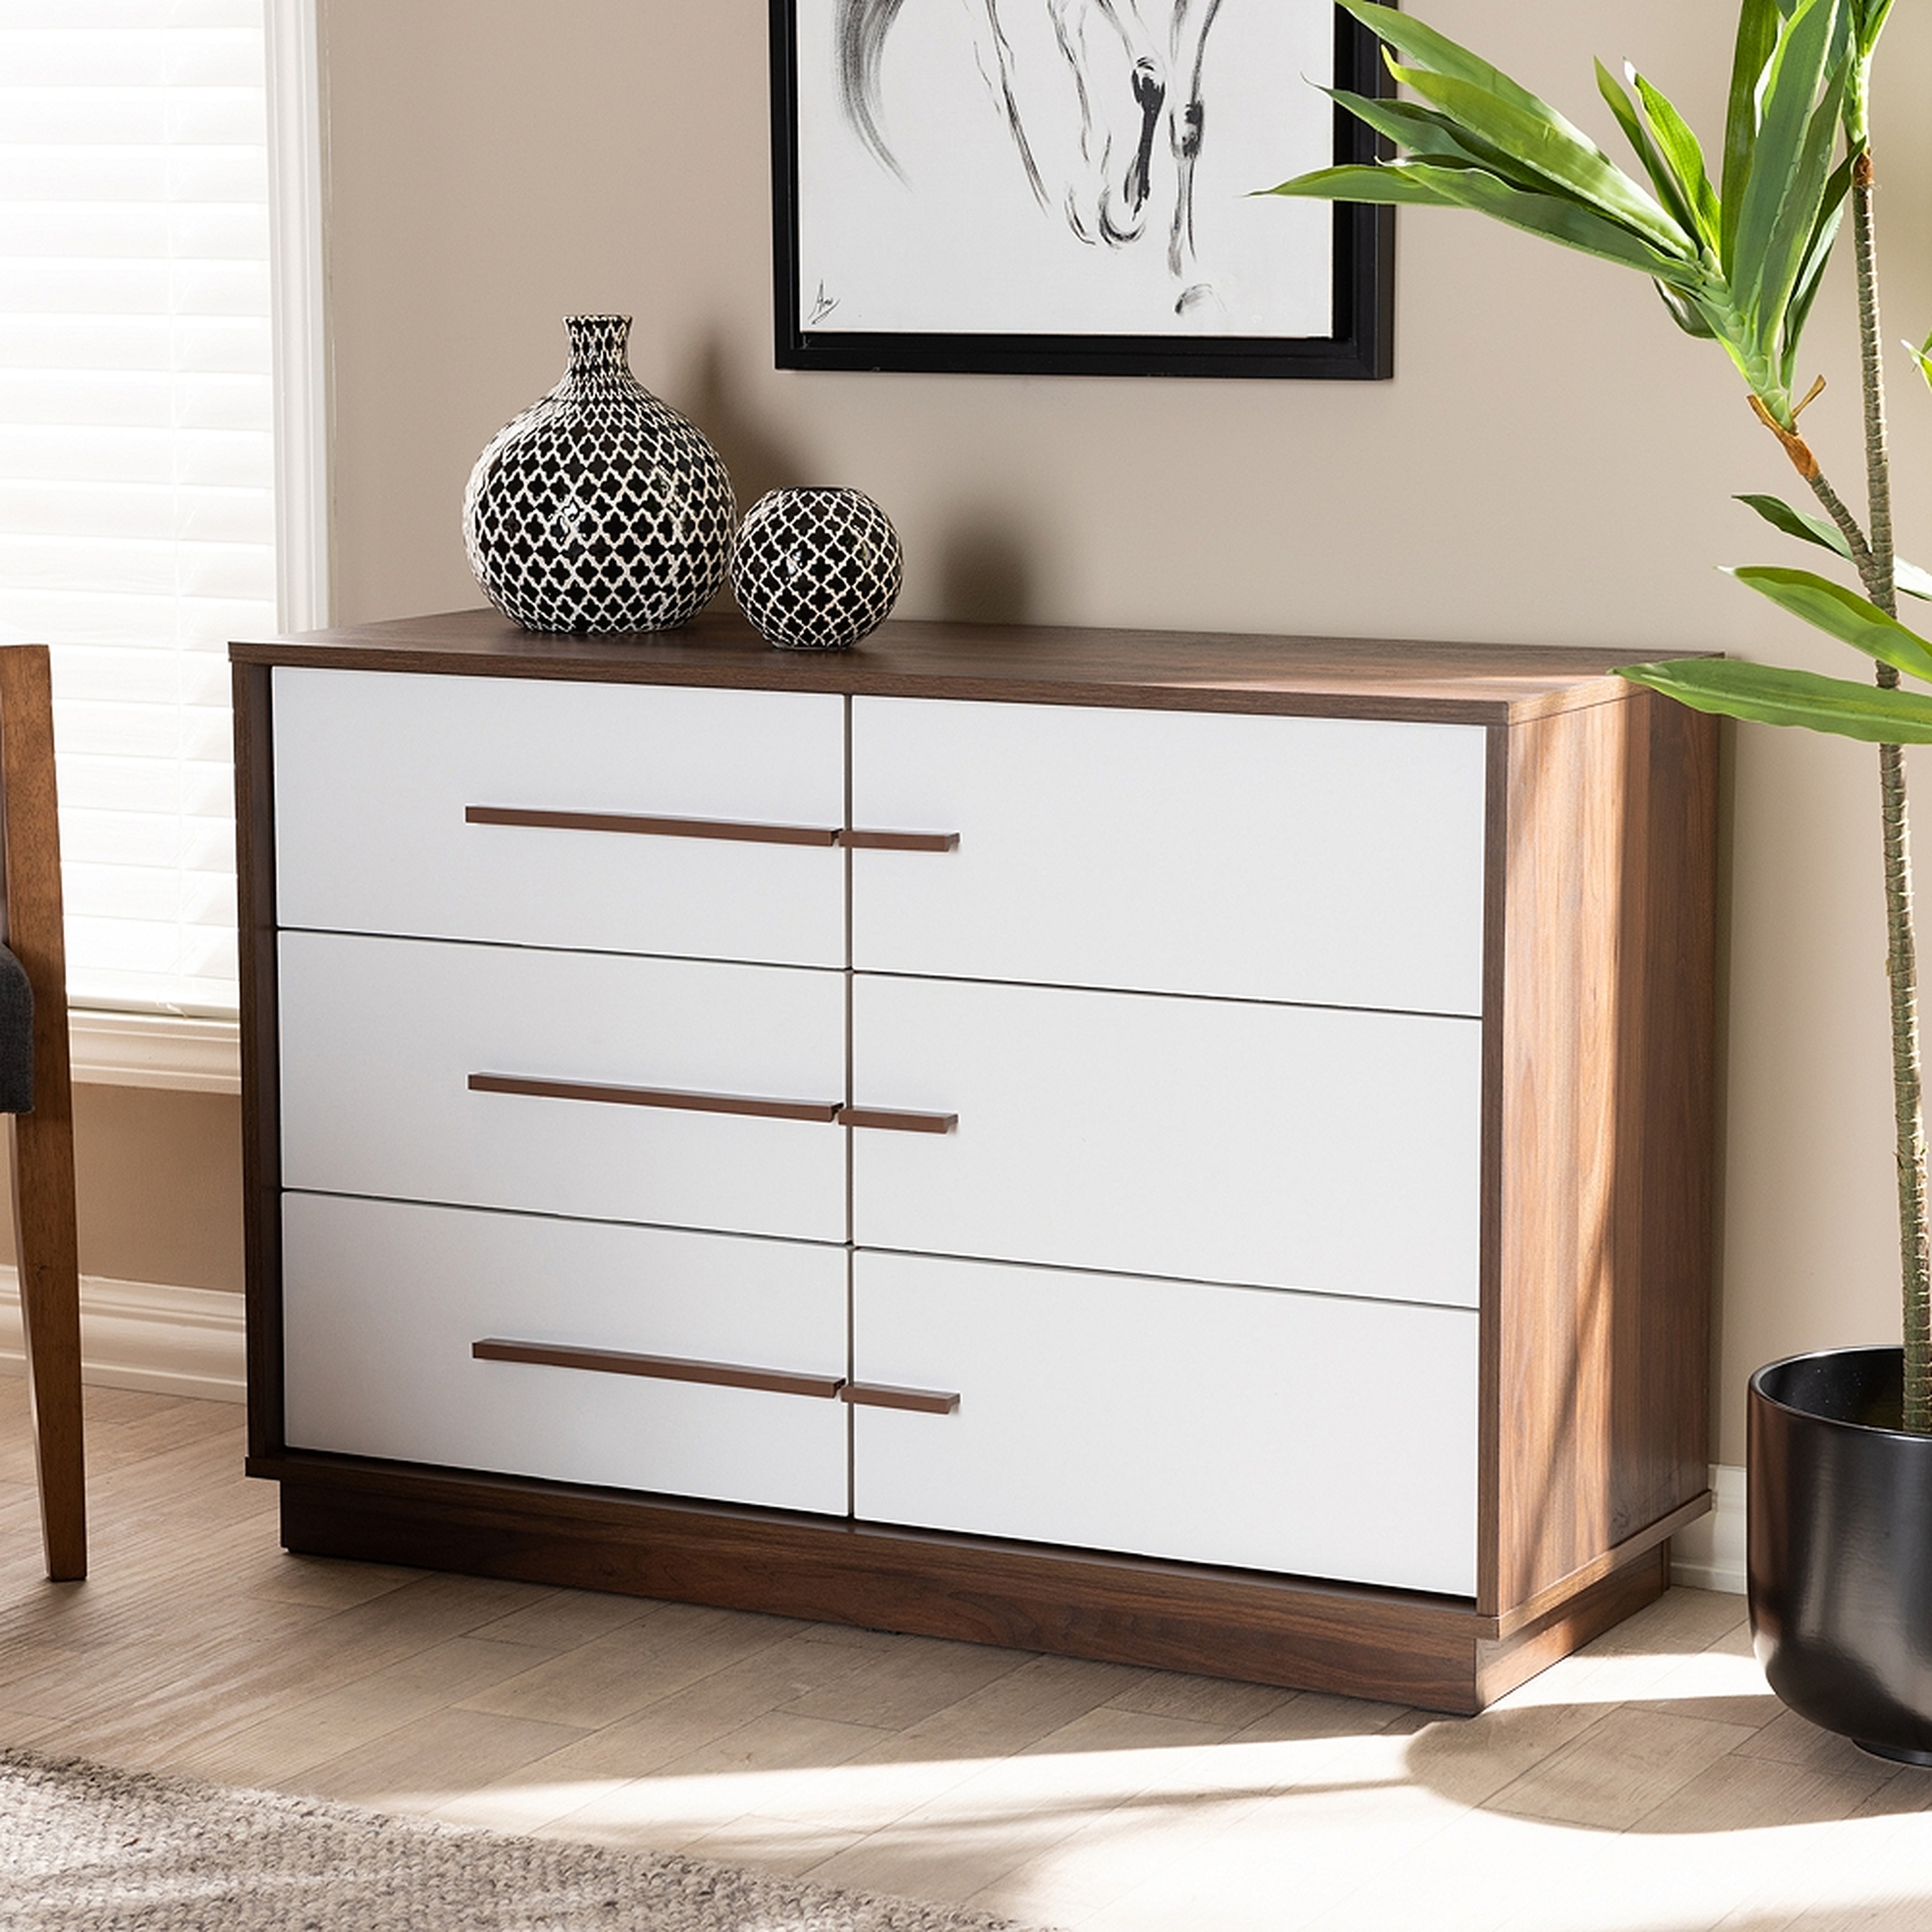 Baxton Studio Mette White and Walnut 6-Drawer Wood Dresser - Style # 74N57 - Lamps Plus